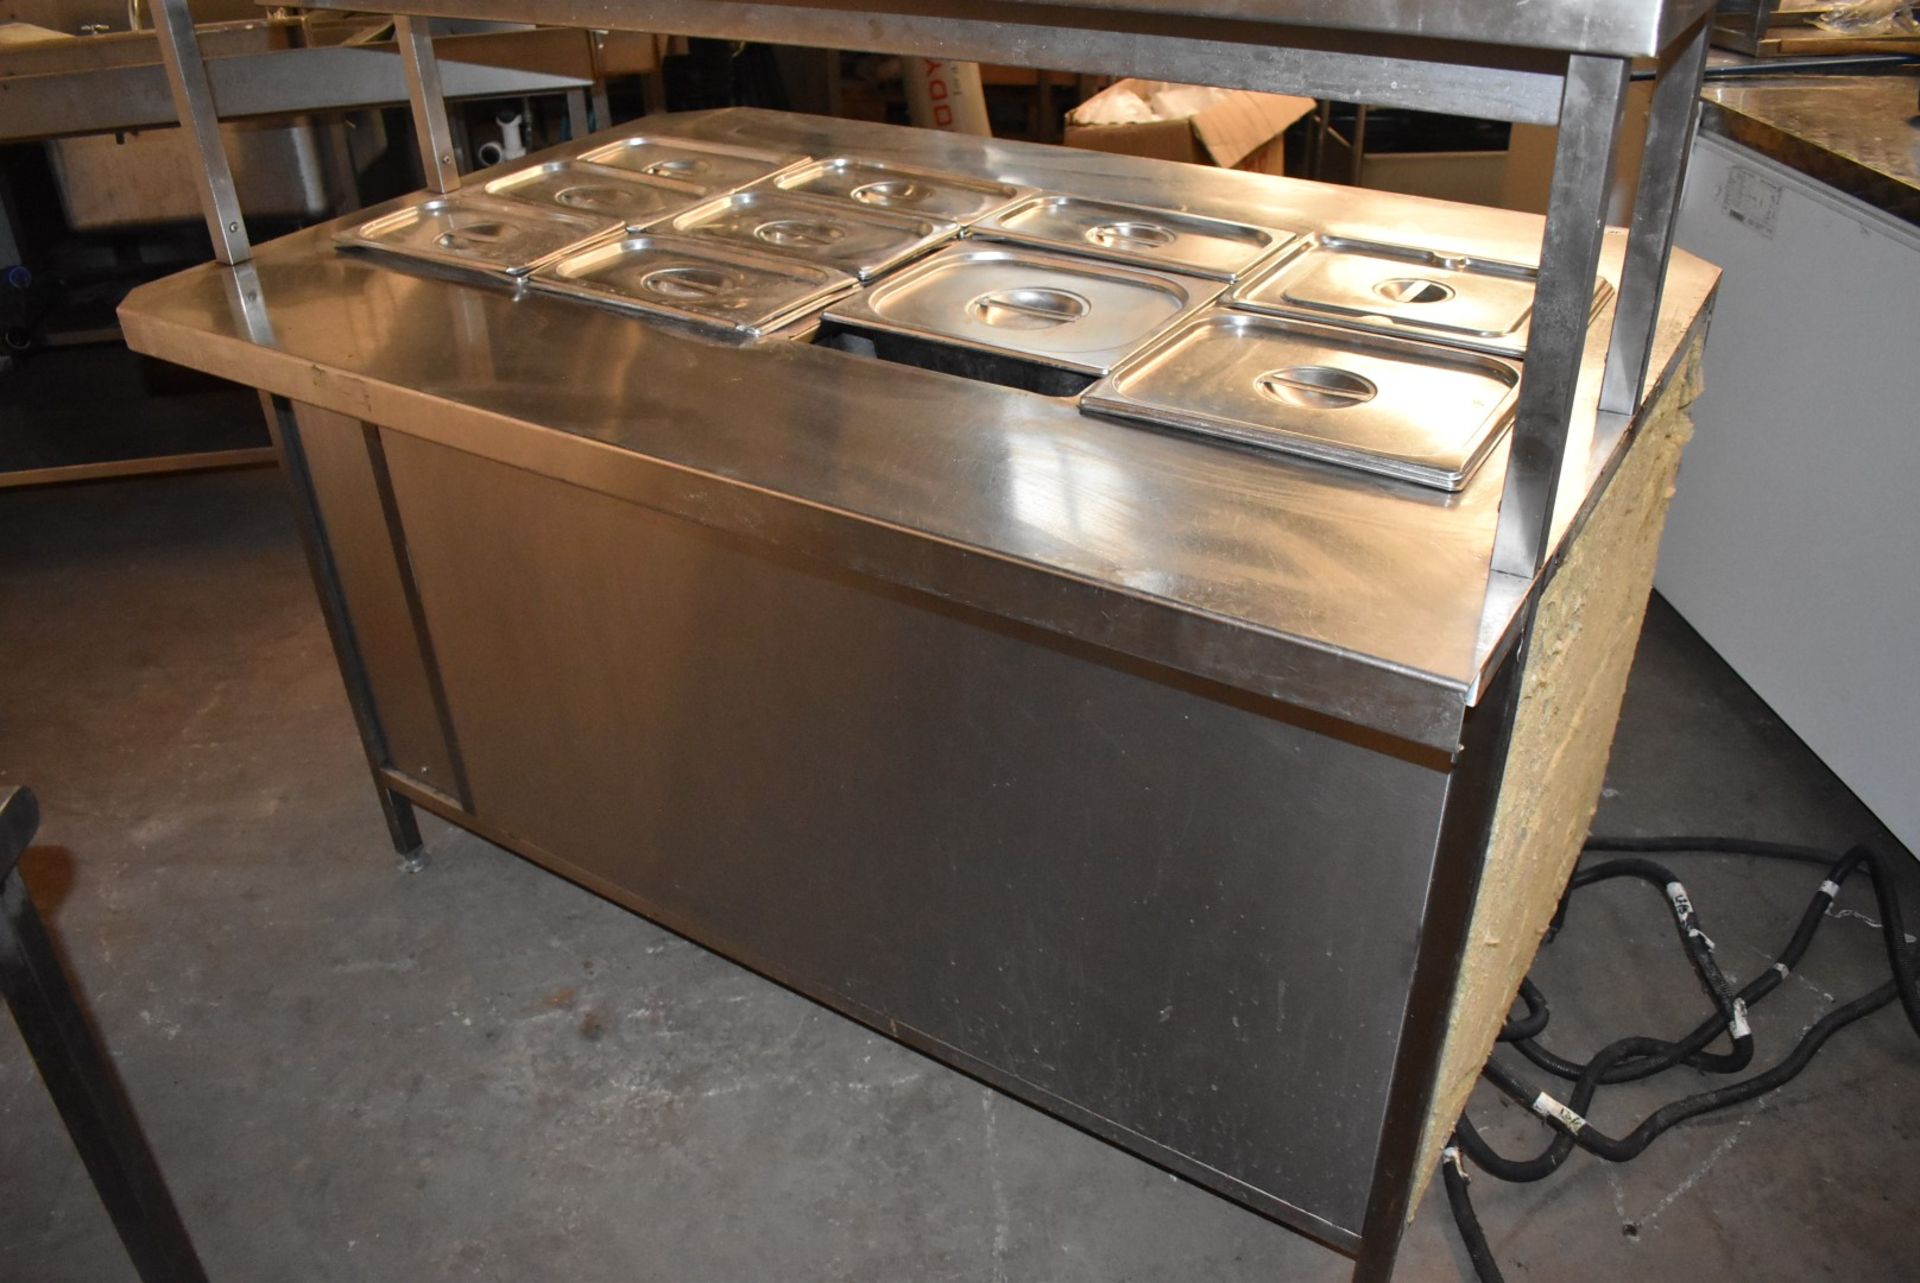 1 x Baine Marie Food Warming Island With Passthrough Plate Warmers, Hot Cupboard and 10 Gastro - Image 19 of 22